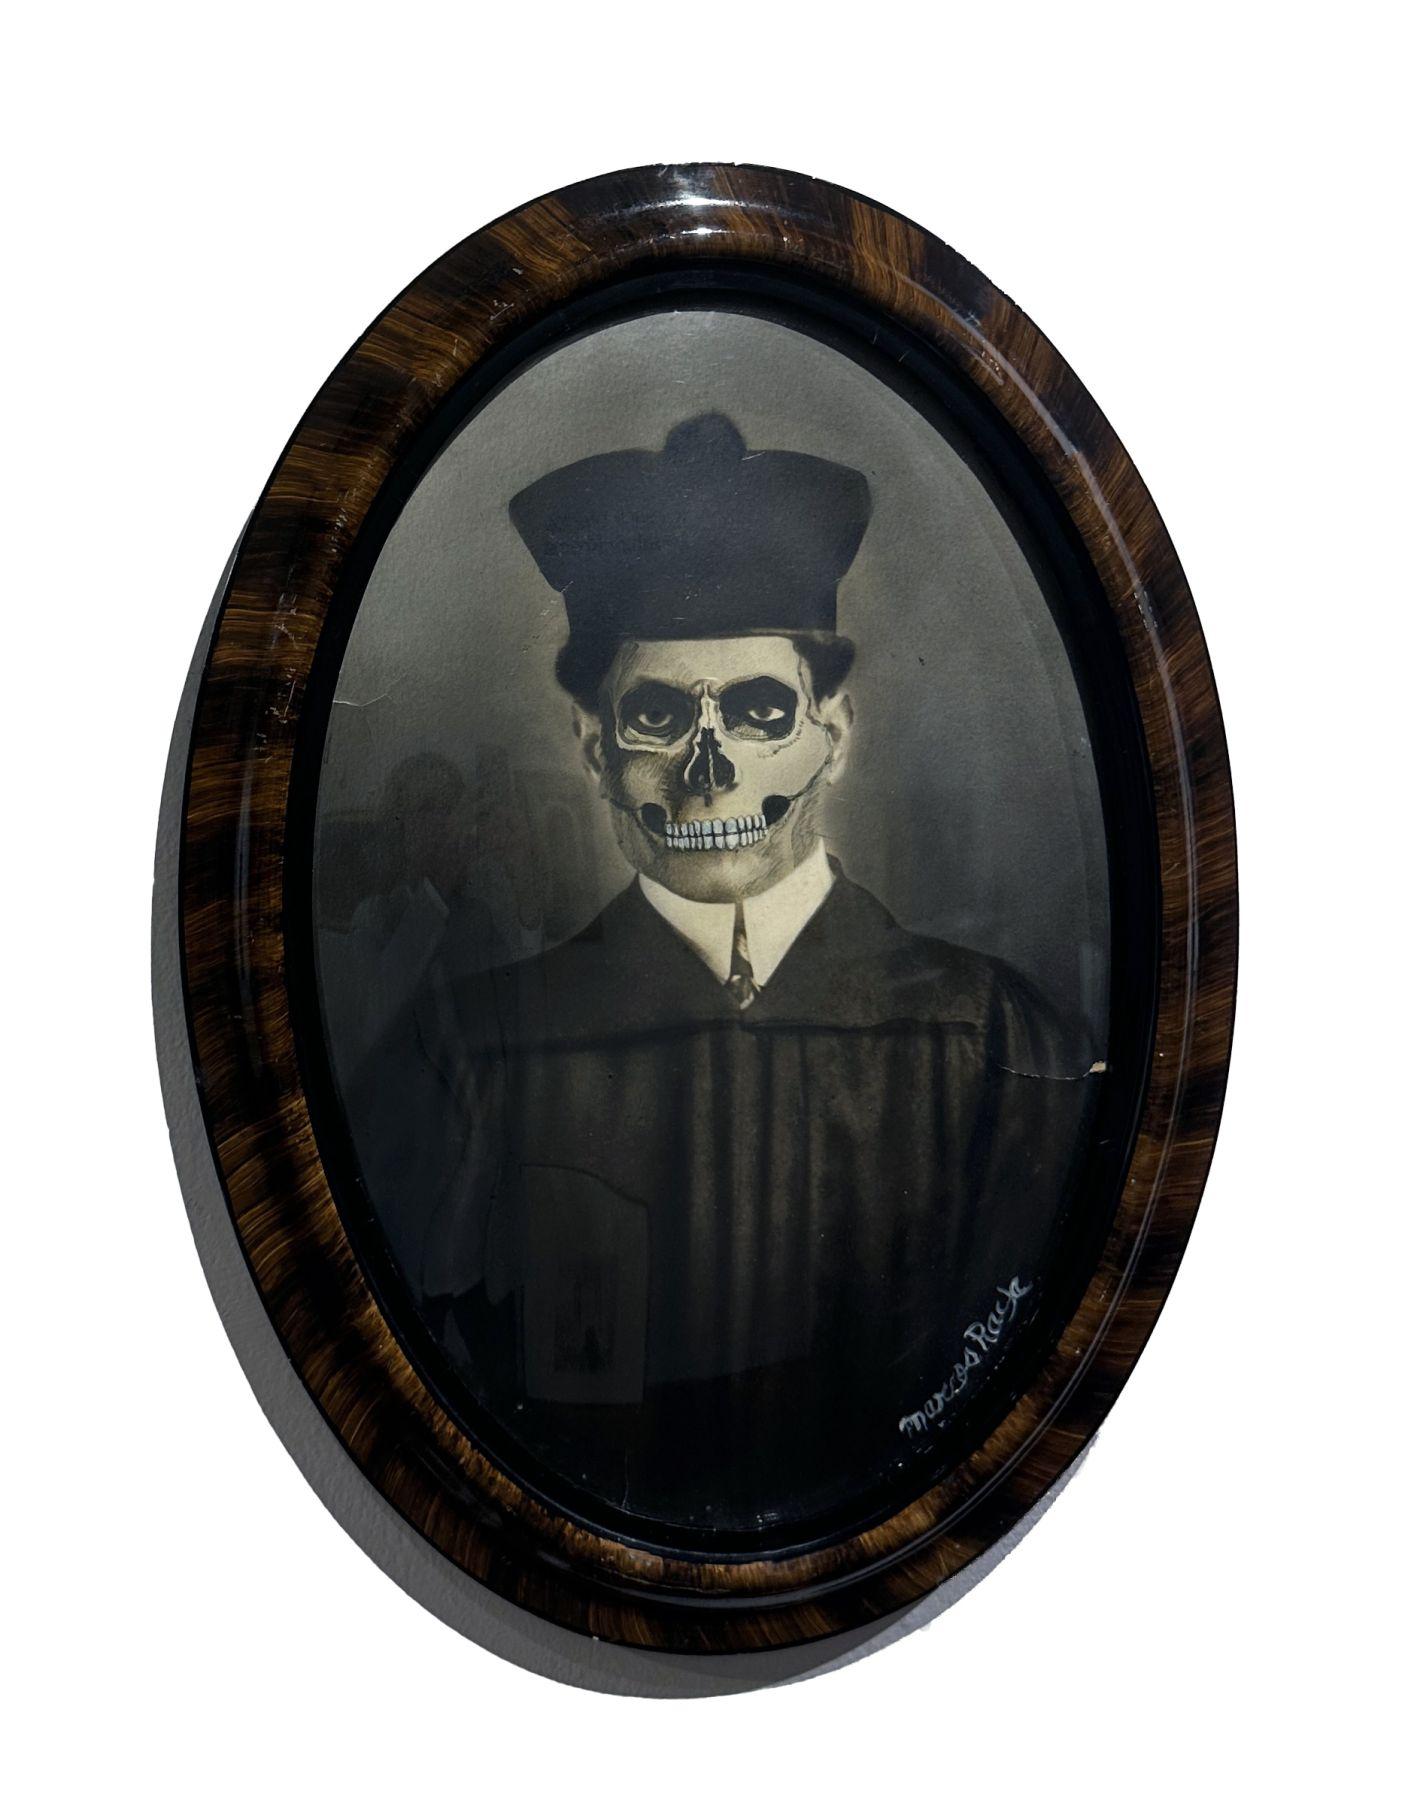 Priest - Antique Painted and Appropriated Photograph, Original Frame - Mixed Media Art by Marcos Raya